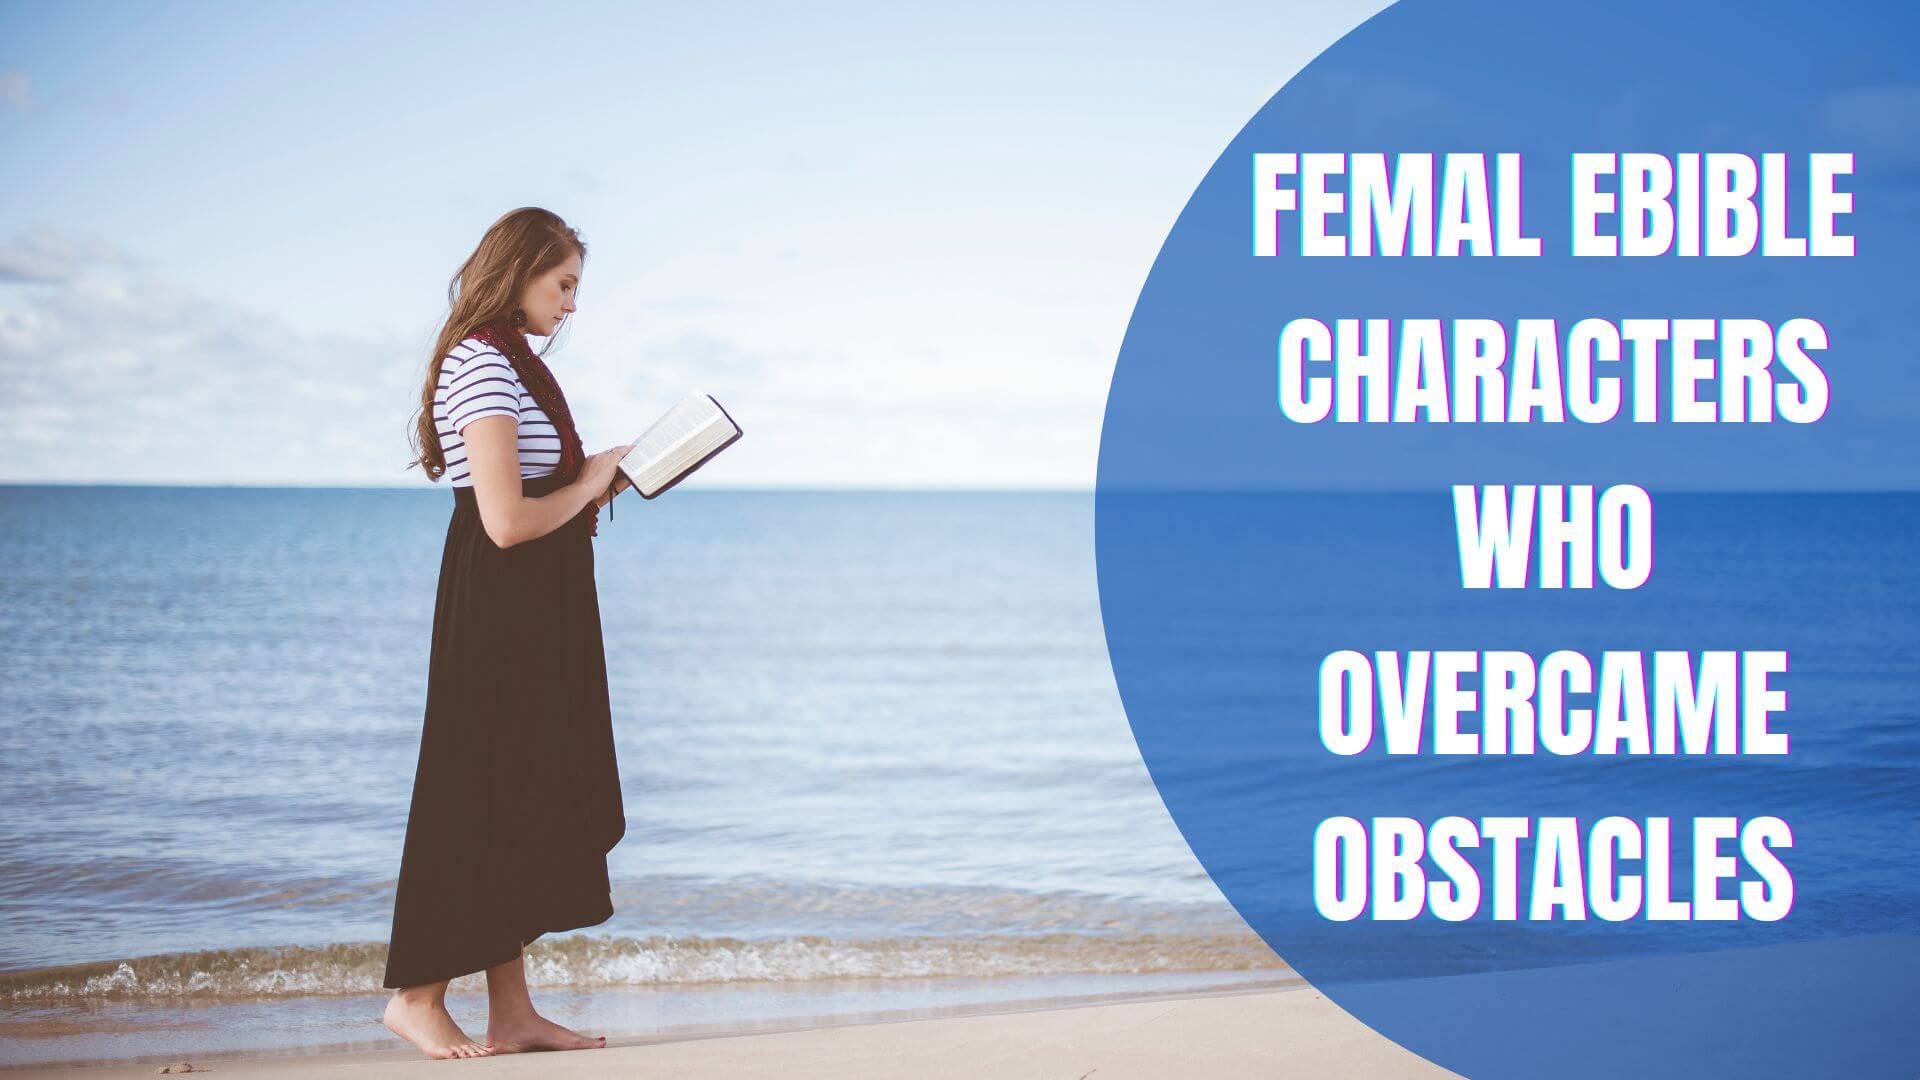 Female Bible characters who overcame obstacles